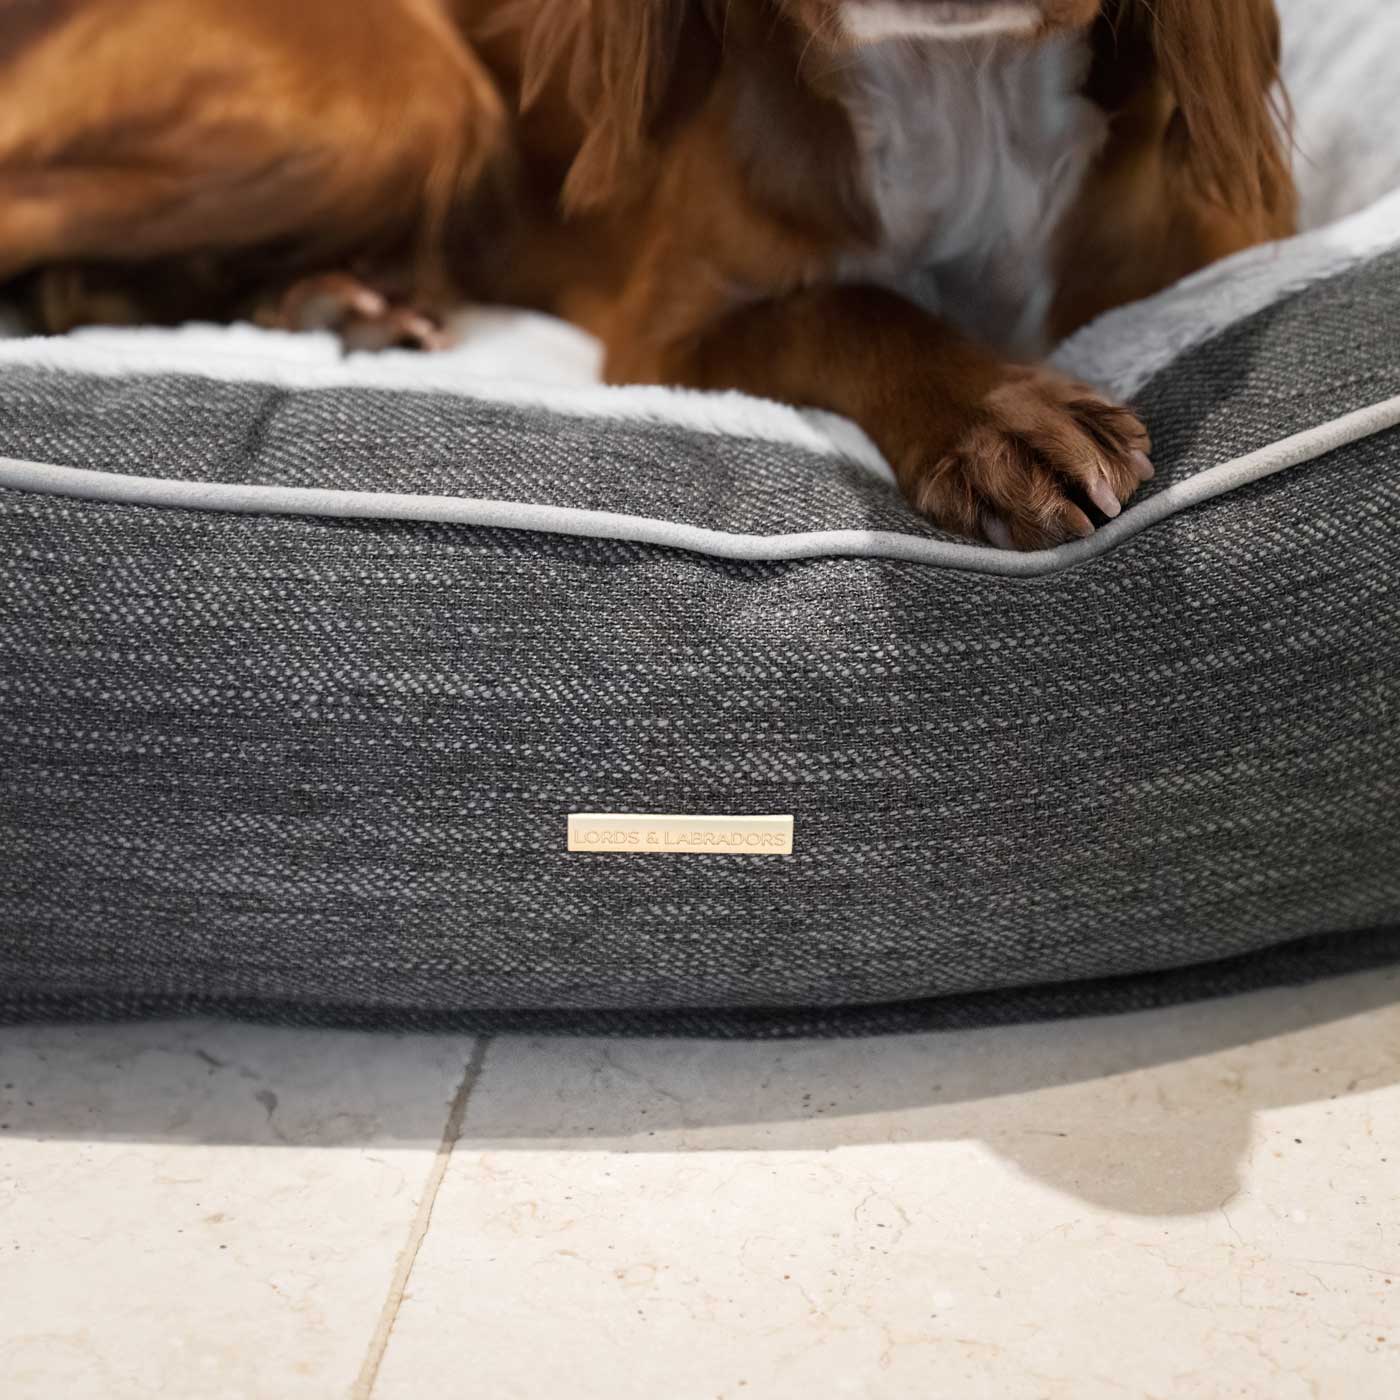 Discover Our Luxurious “The Nest” Dog Bed, Crafted Using Soft, Plush Fabric For Extra Comfort! Bringing Your Canine Companion The Perfect Bed For Dogs To Curl Up To! Available Now at Lords & Labradors       